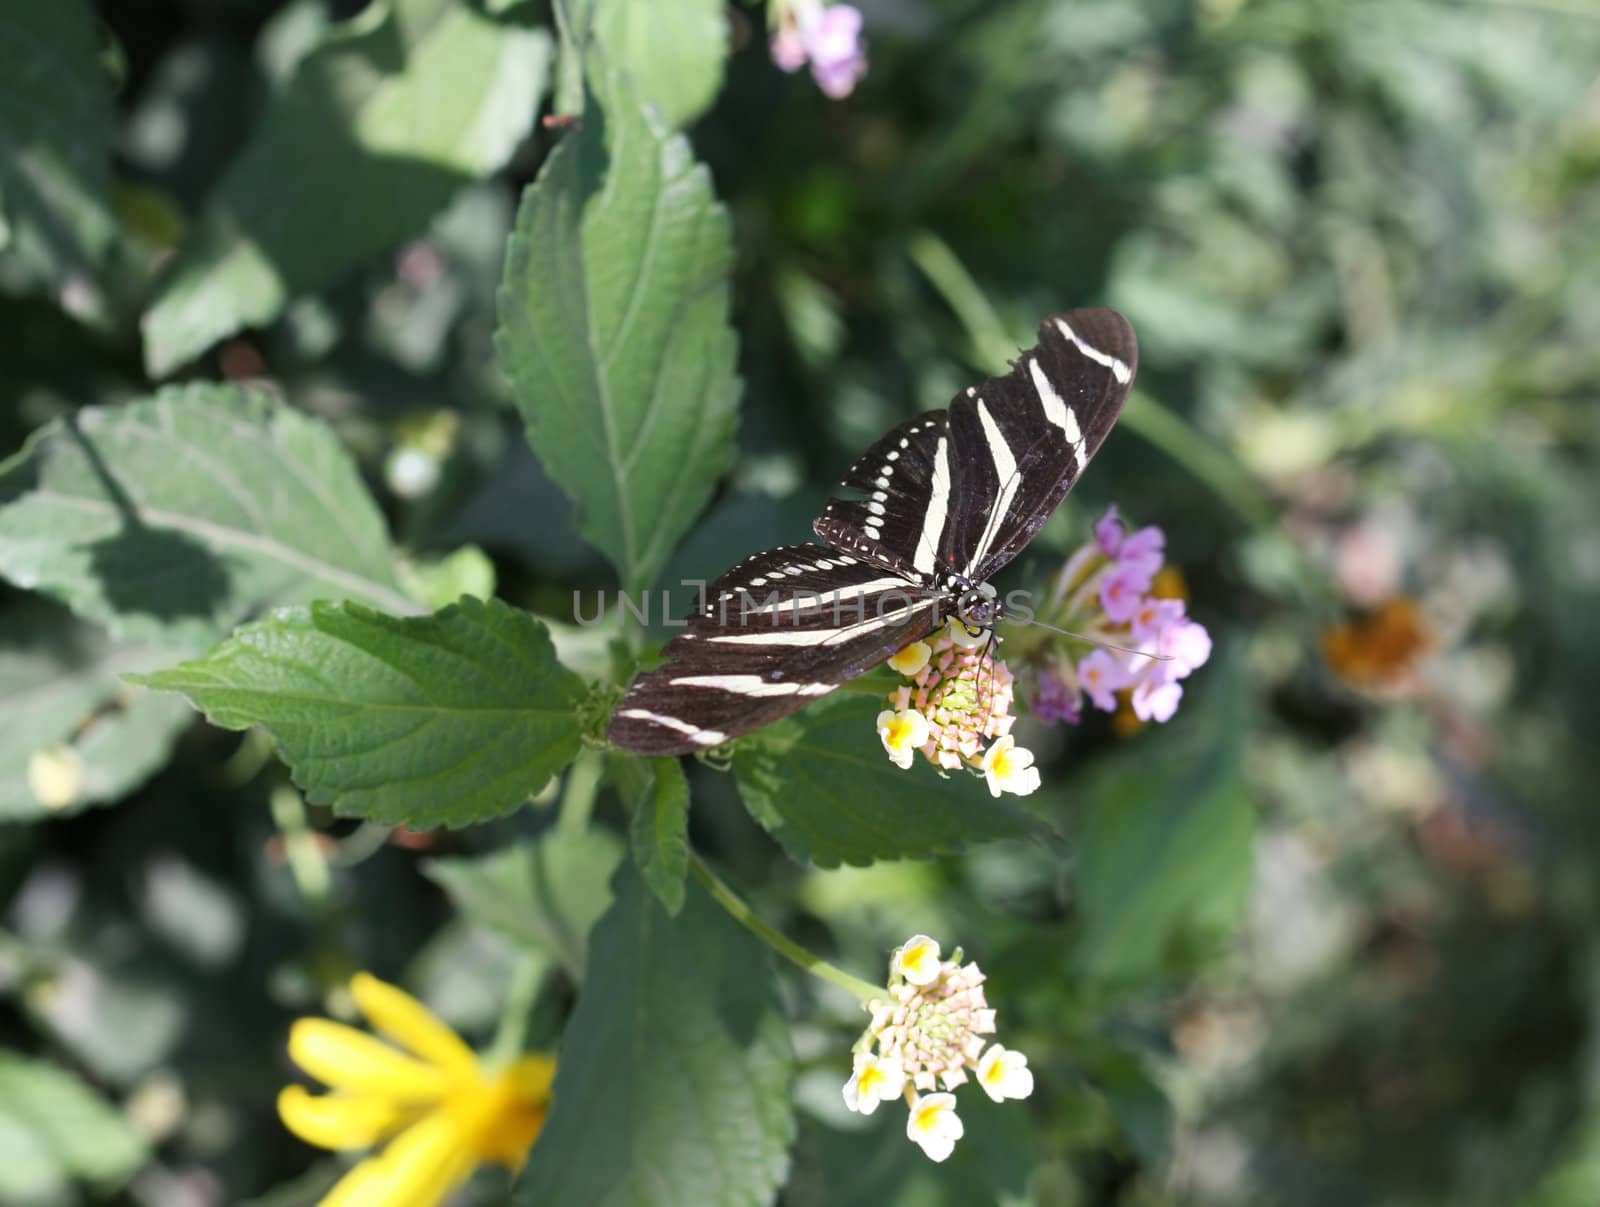 Zebra Longwing butterfly sitting on a flower. ( Heliconius Charitonius)